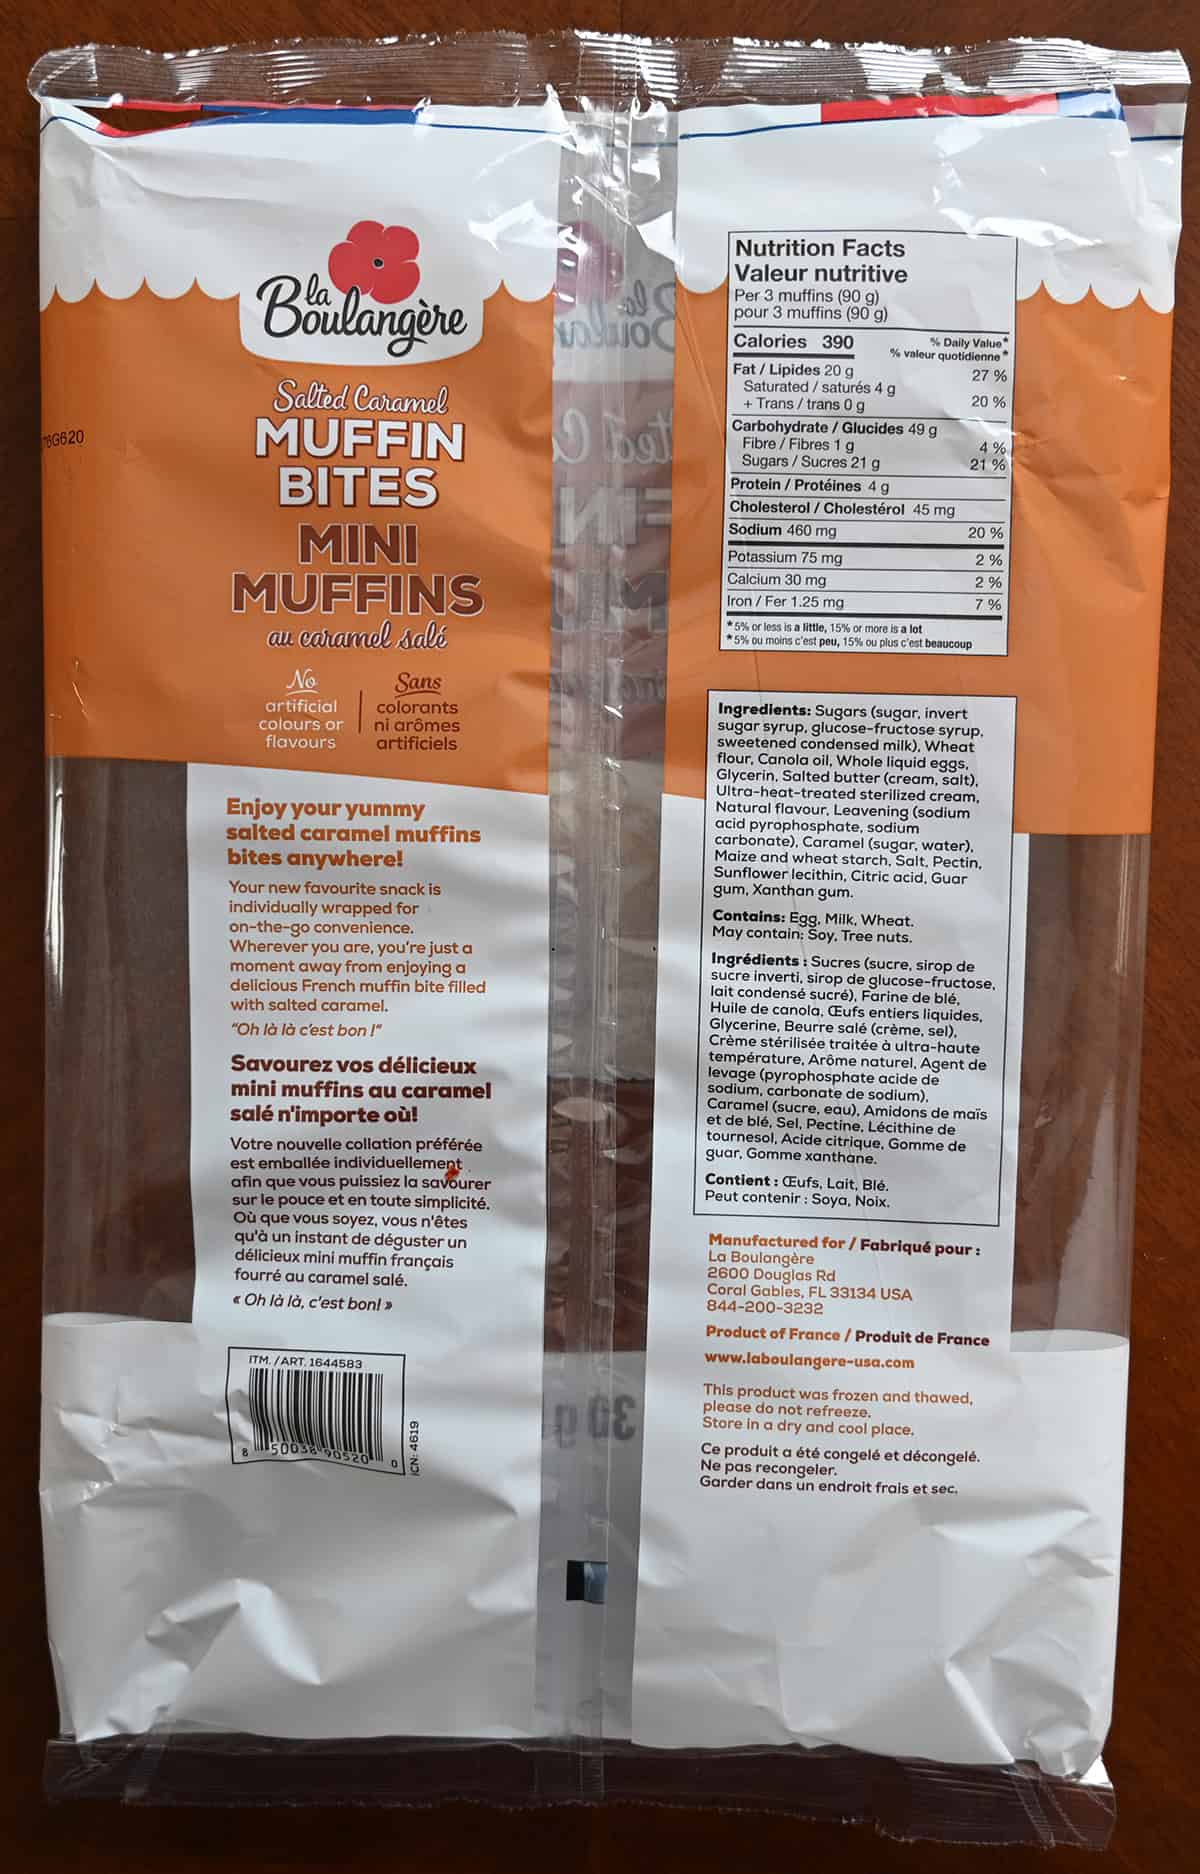 Image of the back of the bag of muffin bites with ingredients, nutrition facts and product description.